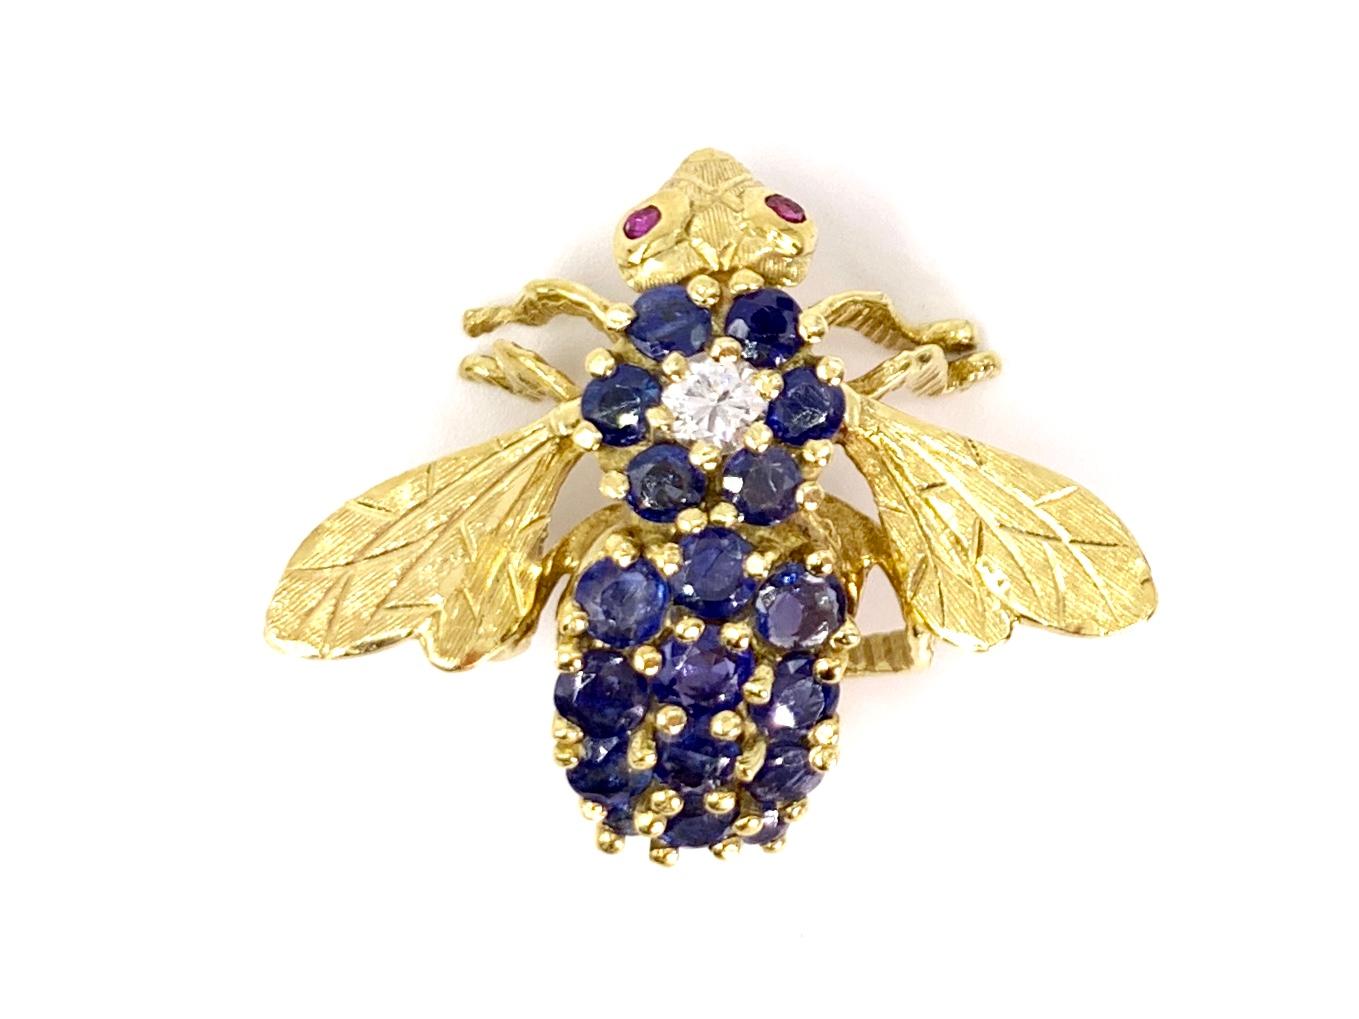 Adorable detailed flying bee brooch crafted by Hammerman Brothers in 18 karat yellow gold featuring one bright white diamond, 18 well saturated blue sapphires and 2 cabochon ruby eyes. Round brilliant diamond weighs approximately .20 carats at